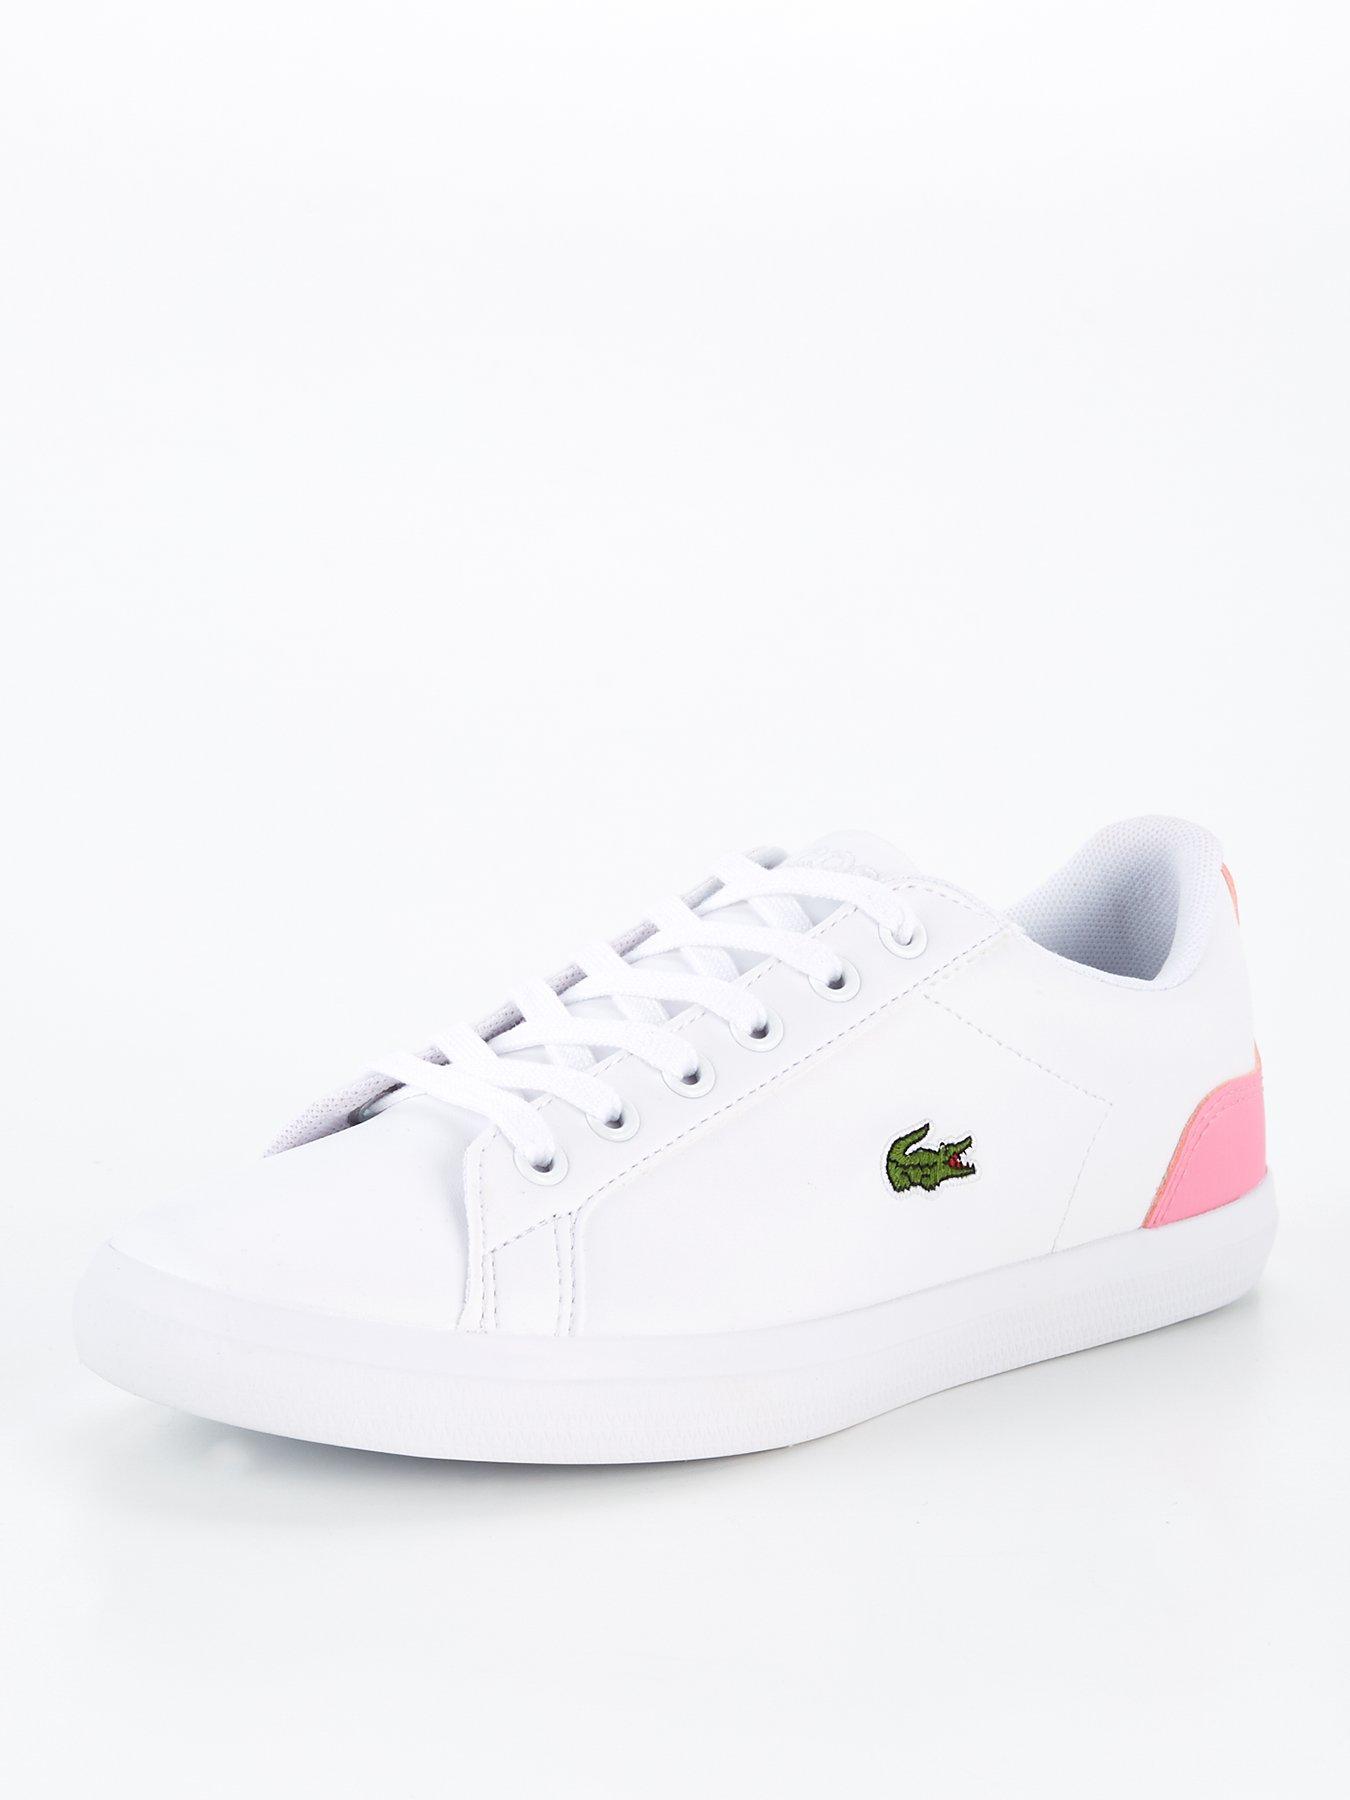 girls pink lacoste trainers